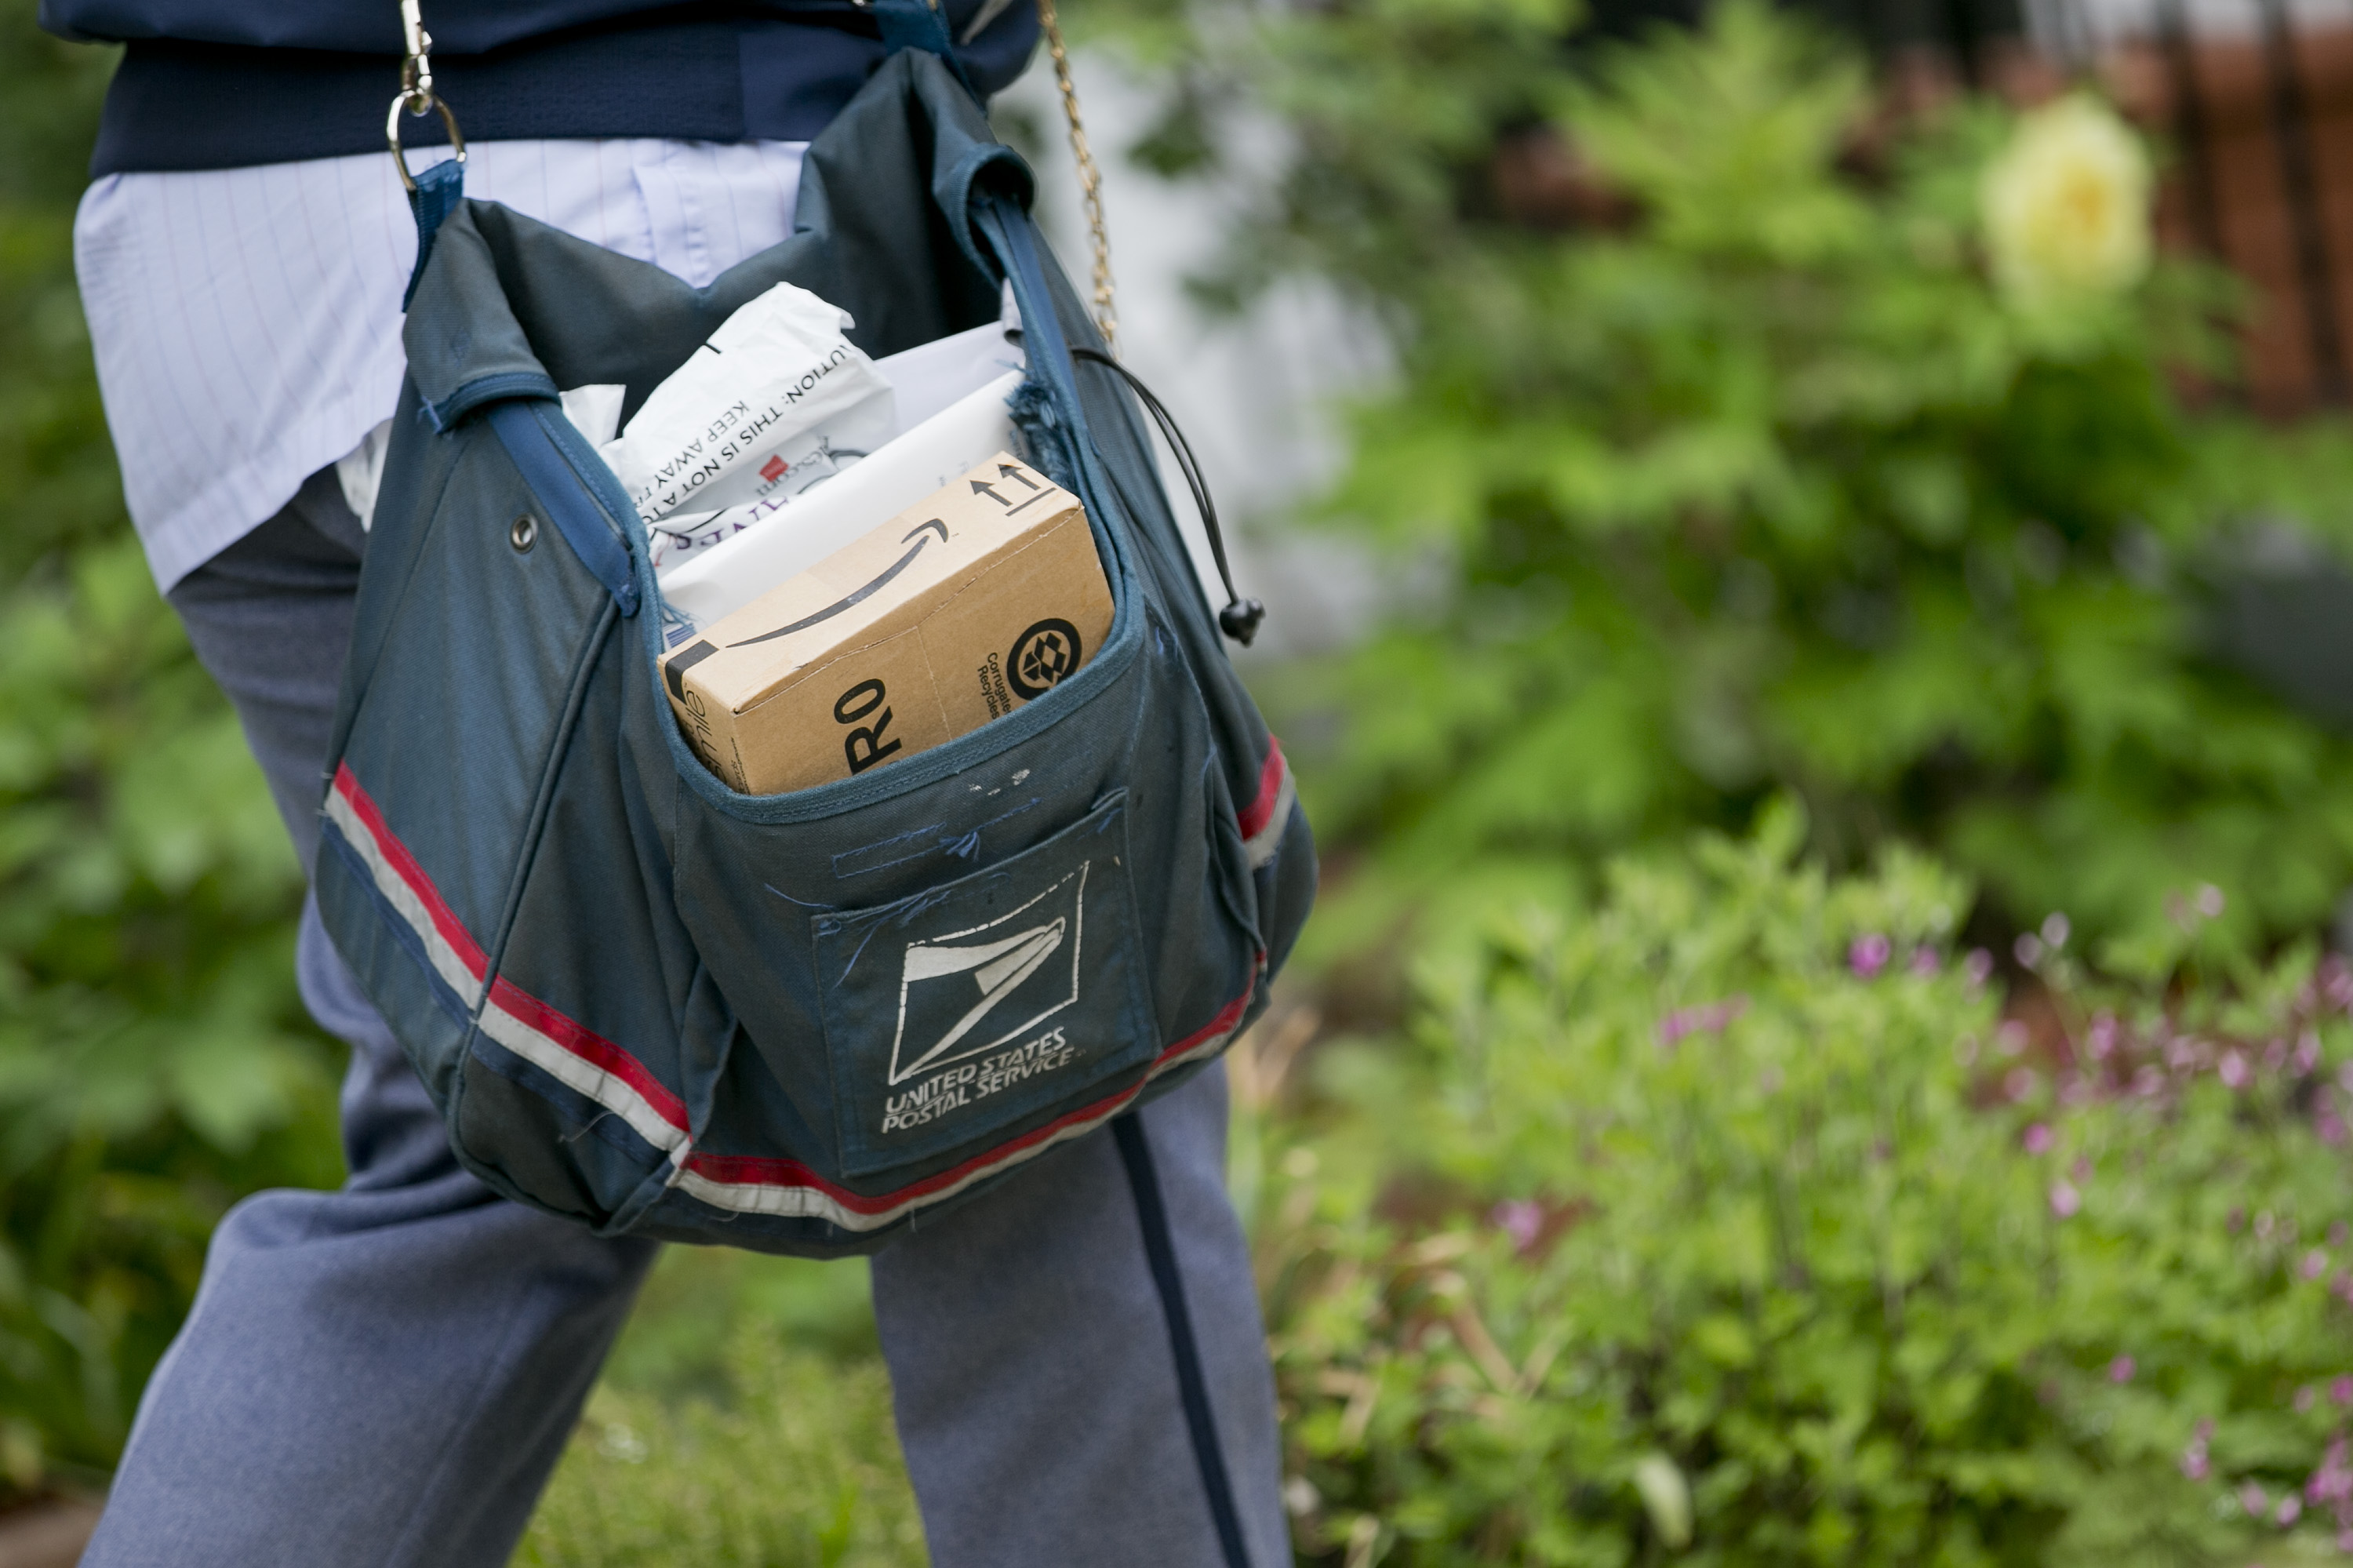 US Postal Service Mail Delivery Ahead Of Second-Quarter Results